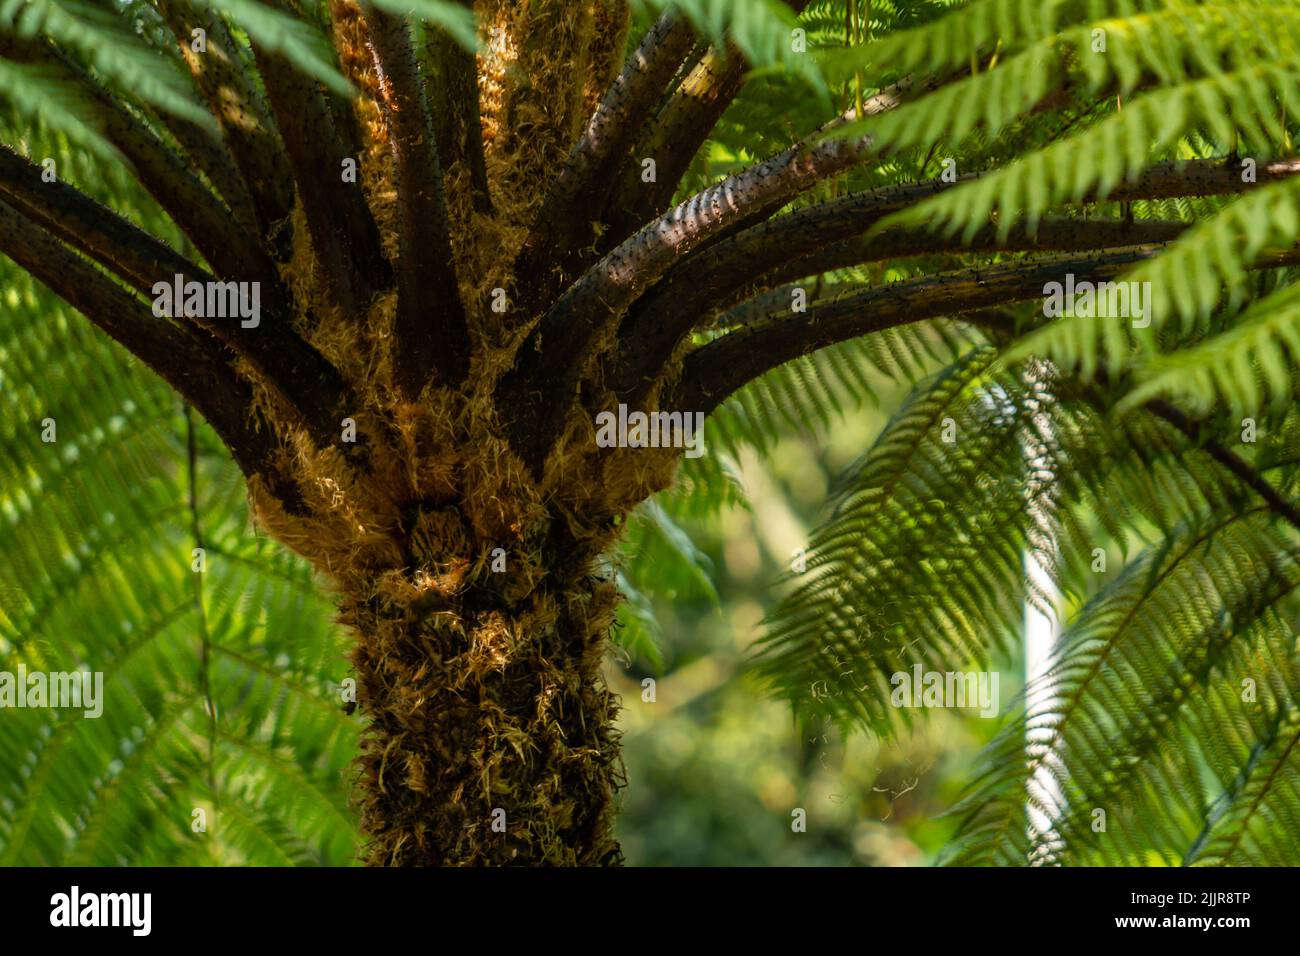 Hajj fern plants that have matured, the stems are hairy brown, thick green leaves grow wild in the forest Stock Photo